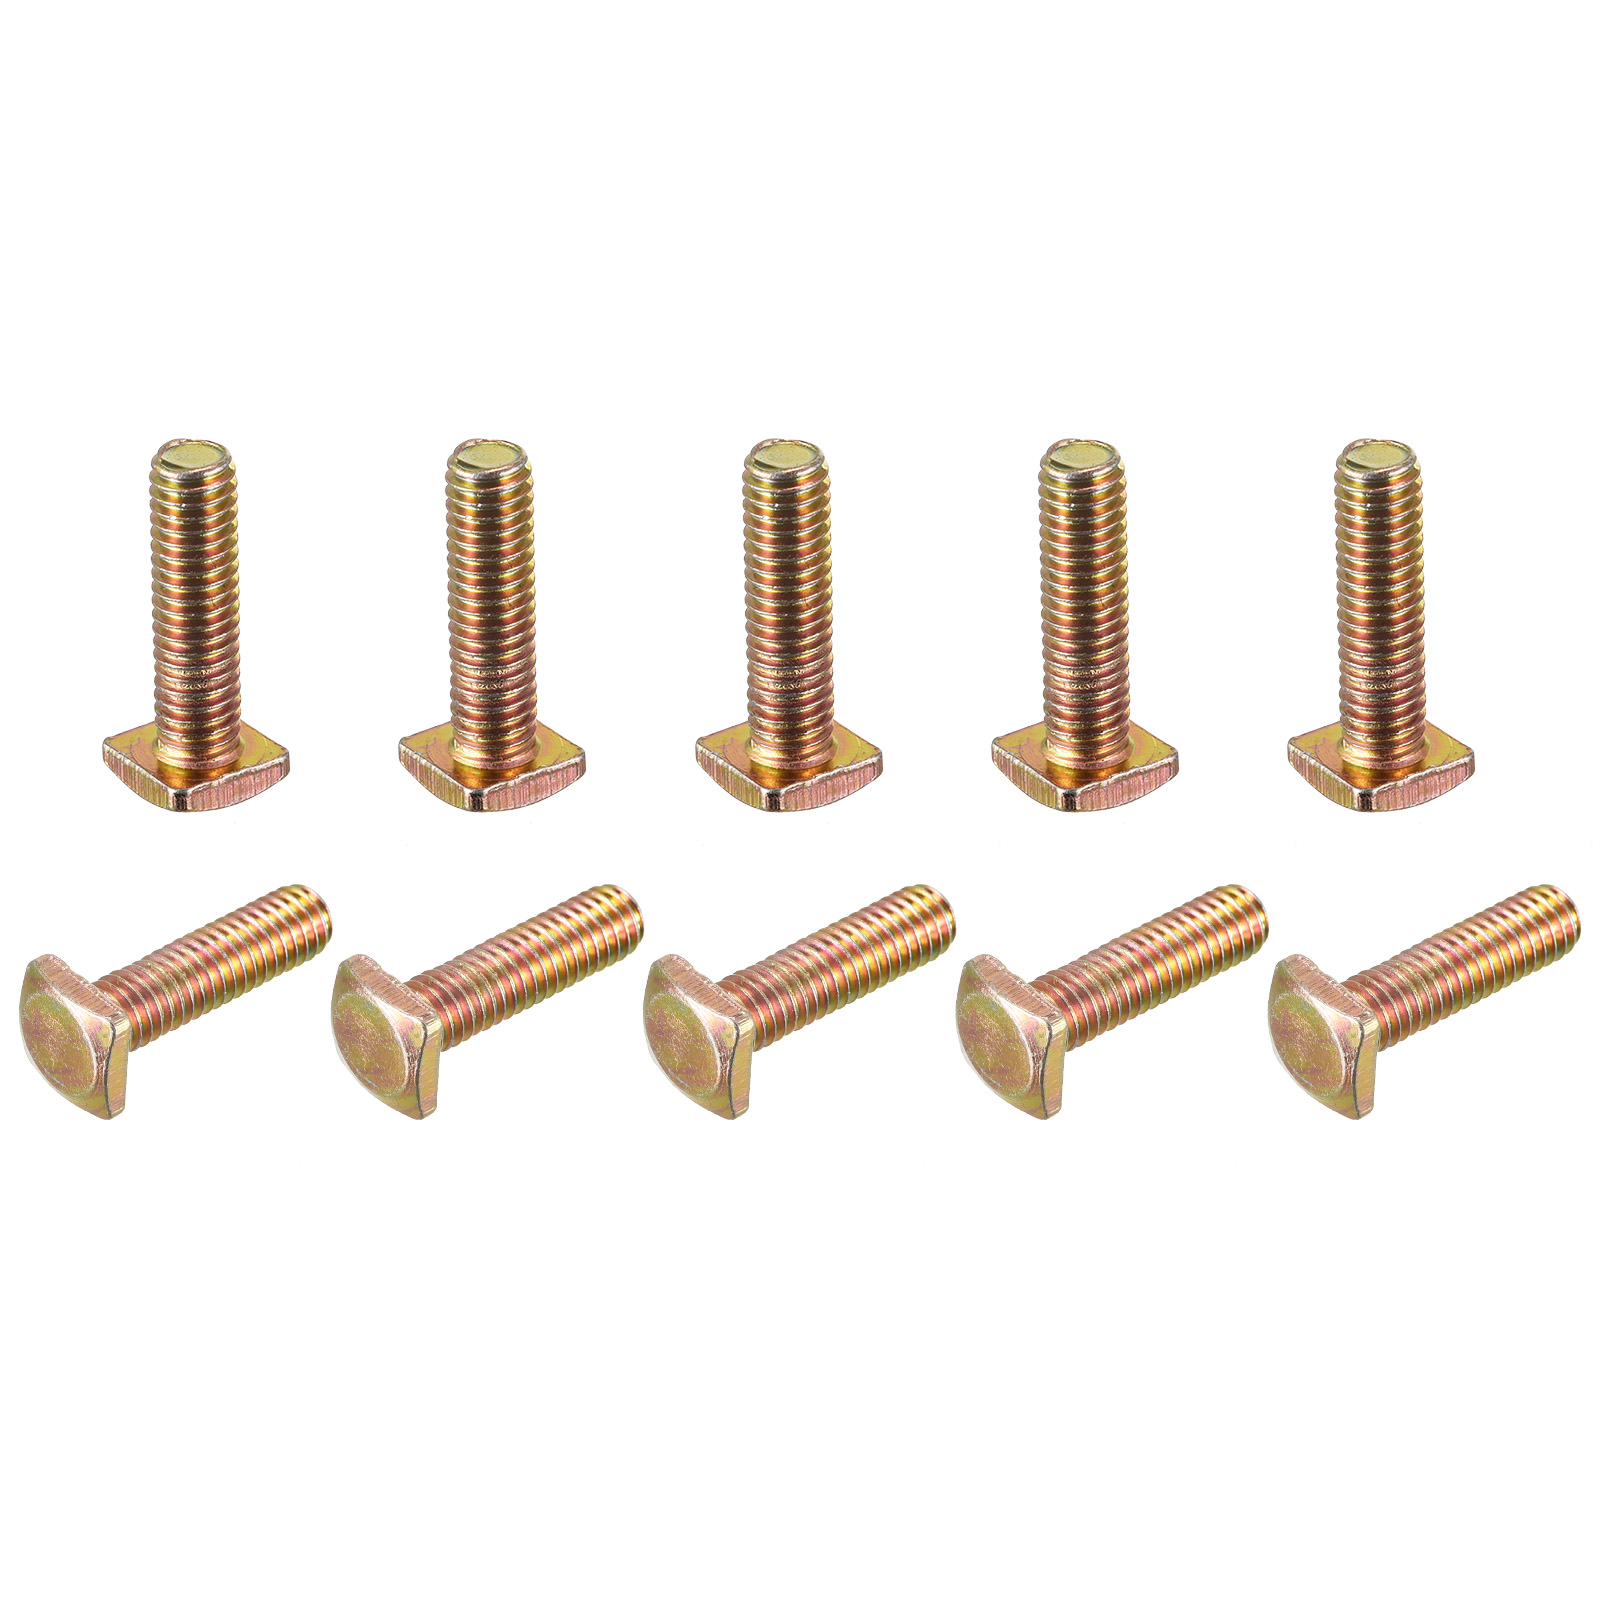 Square Head Bolt, 10 Pack M6x22mm Carbon Steel Grade 4.8 Square Screws, Gold Tone - image 1 of 5